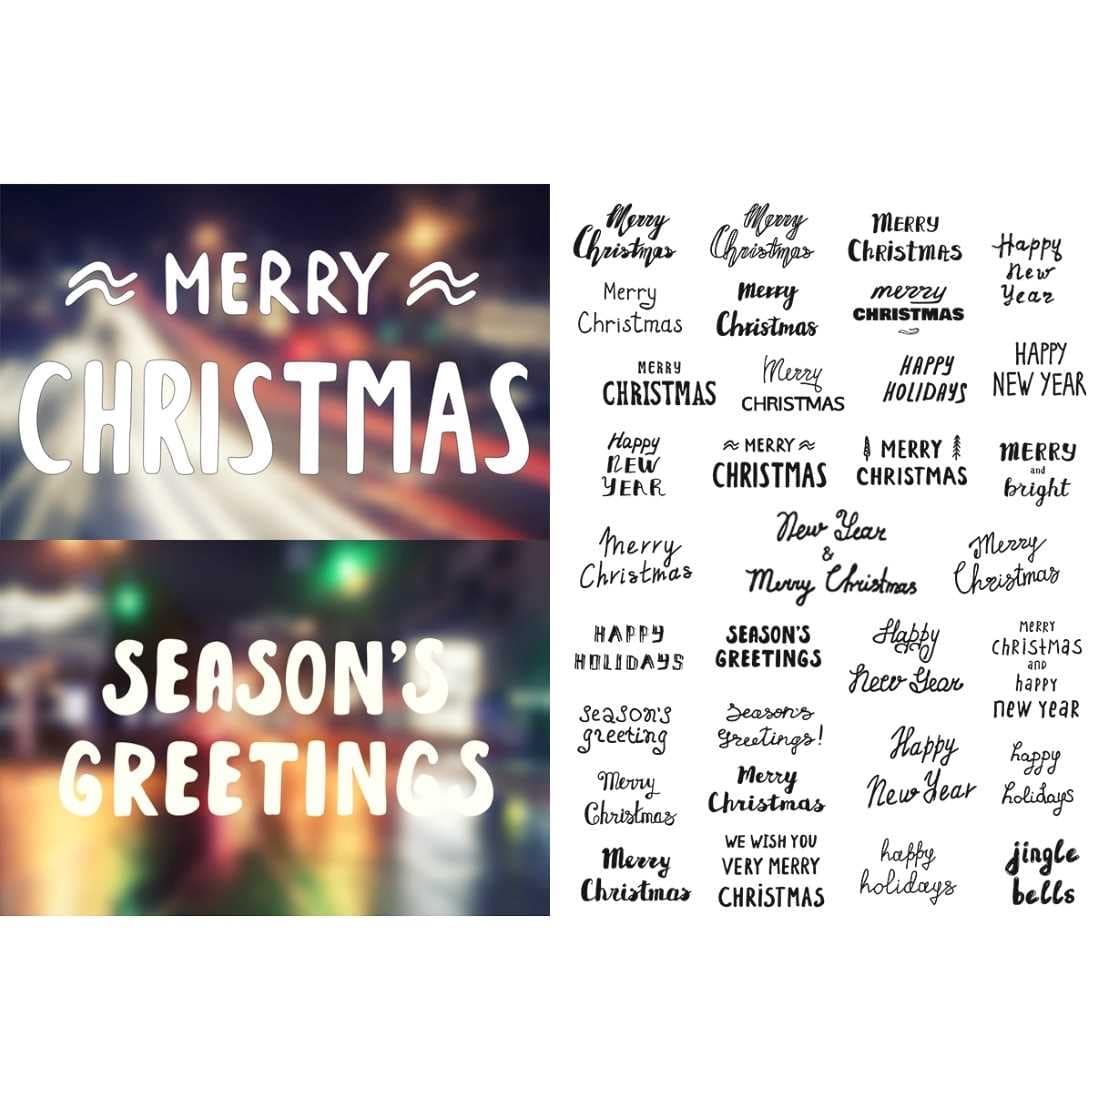 Christmas and New Year Quotes Handwritten image.